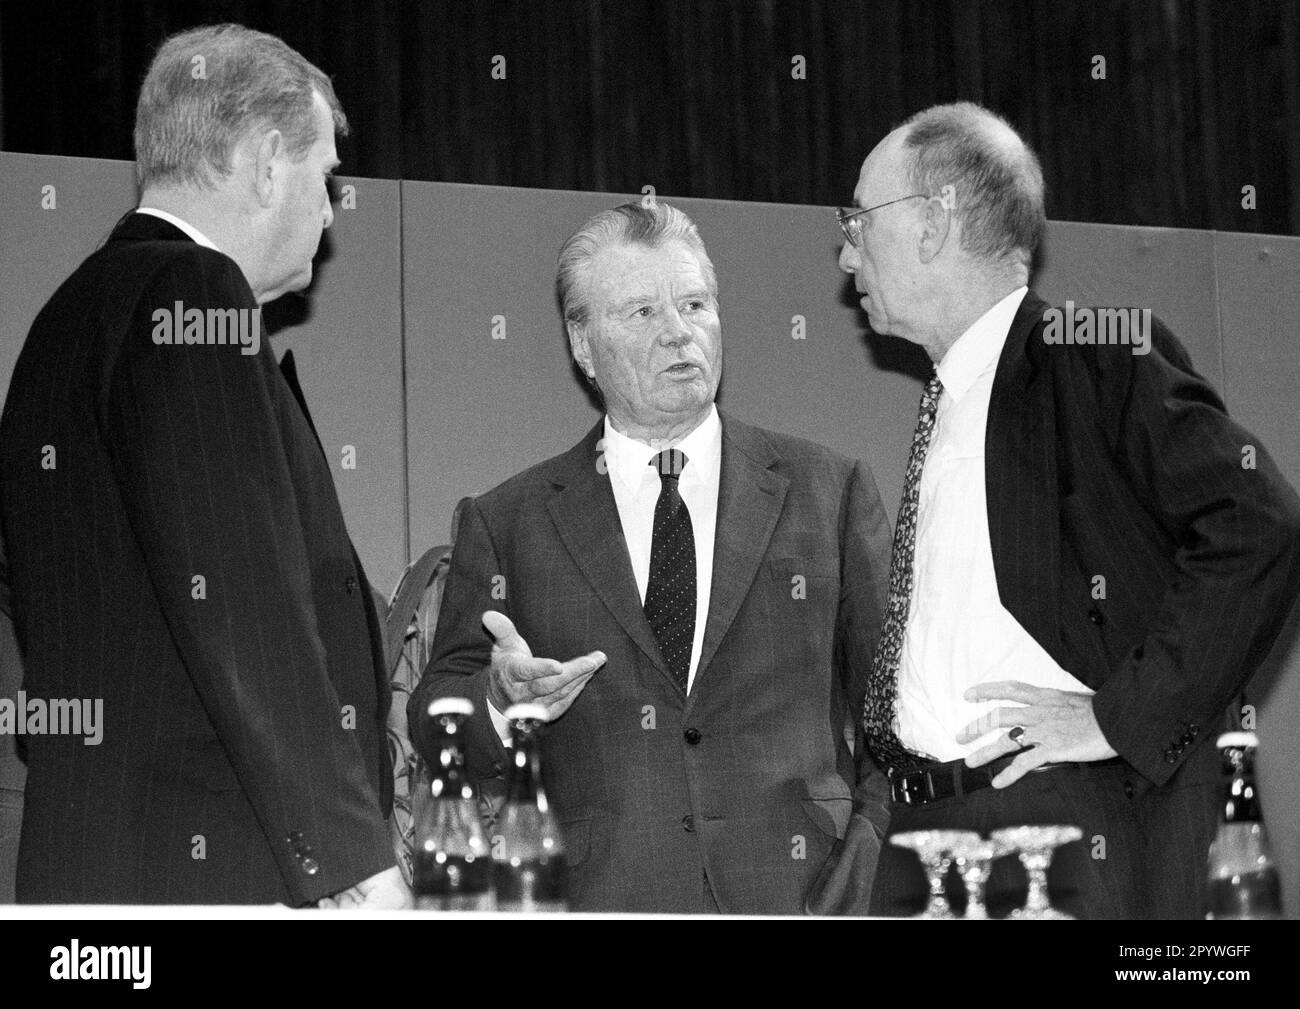 Friedel NEUBER , Chairman of the Board of WestLB , Walter SEIPP , Chairman of the Board of Commerzbank AG , and Edzard REUTER , Chairman of the Board of Daimler-Benz AG , July 1990 [automated translation] Stock Photo